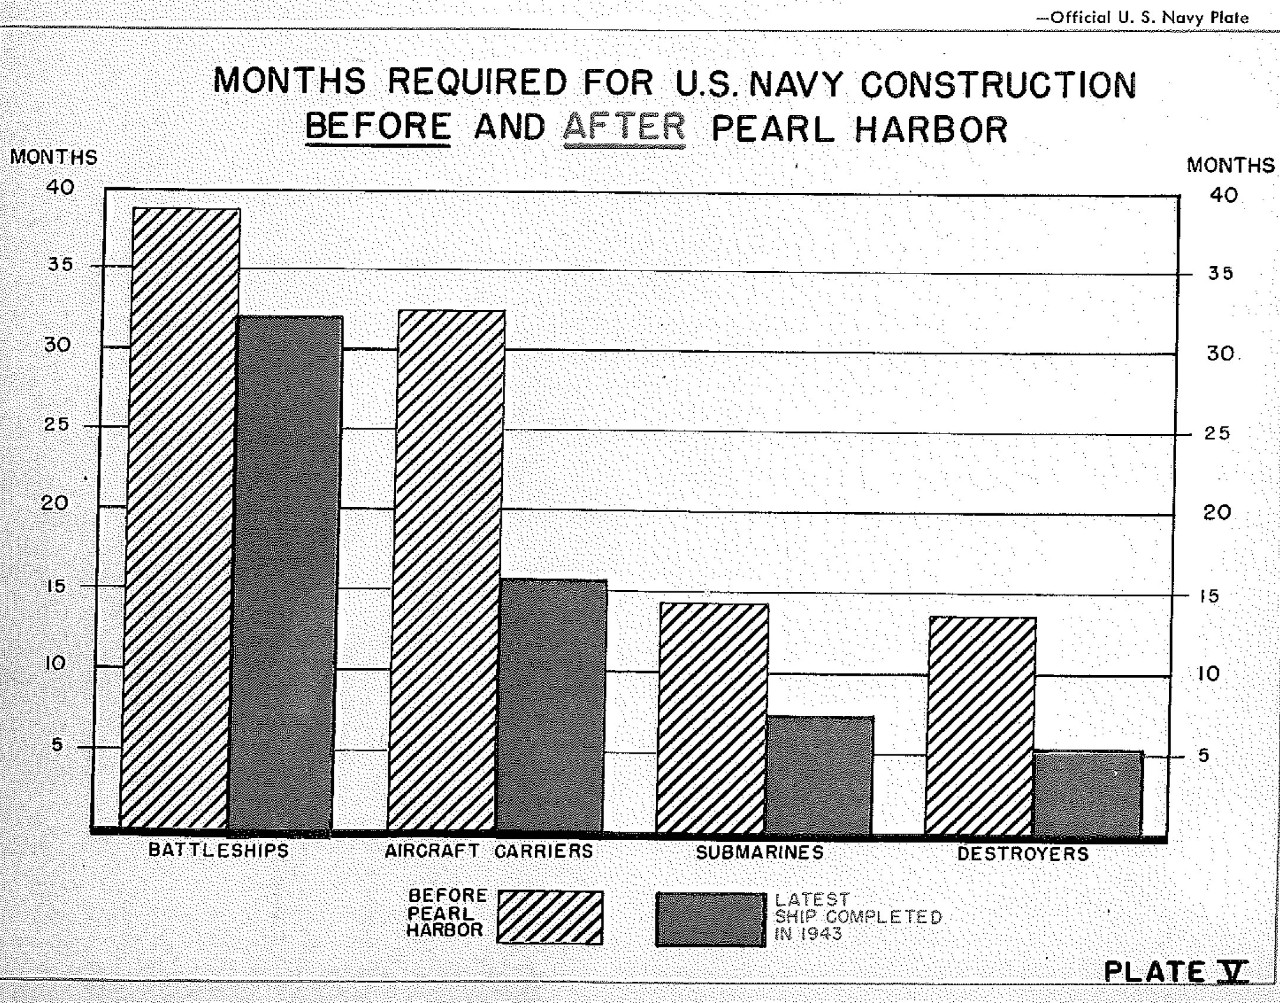 Months required for U.S. Navy construction before and after Pearl Harbor, Plate V 